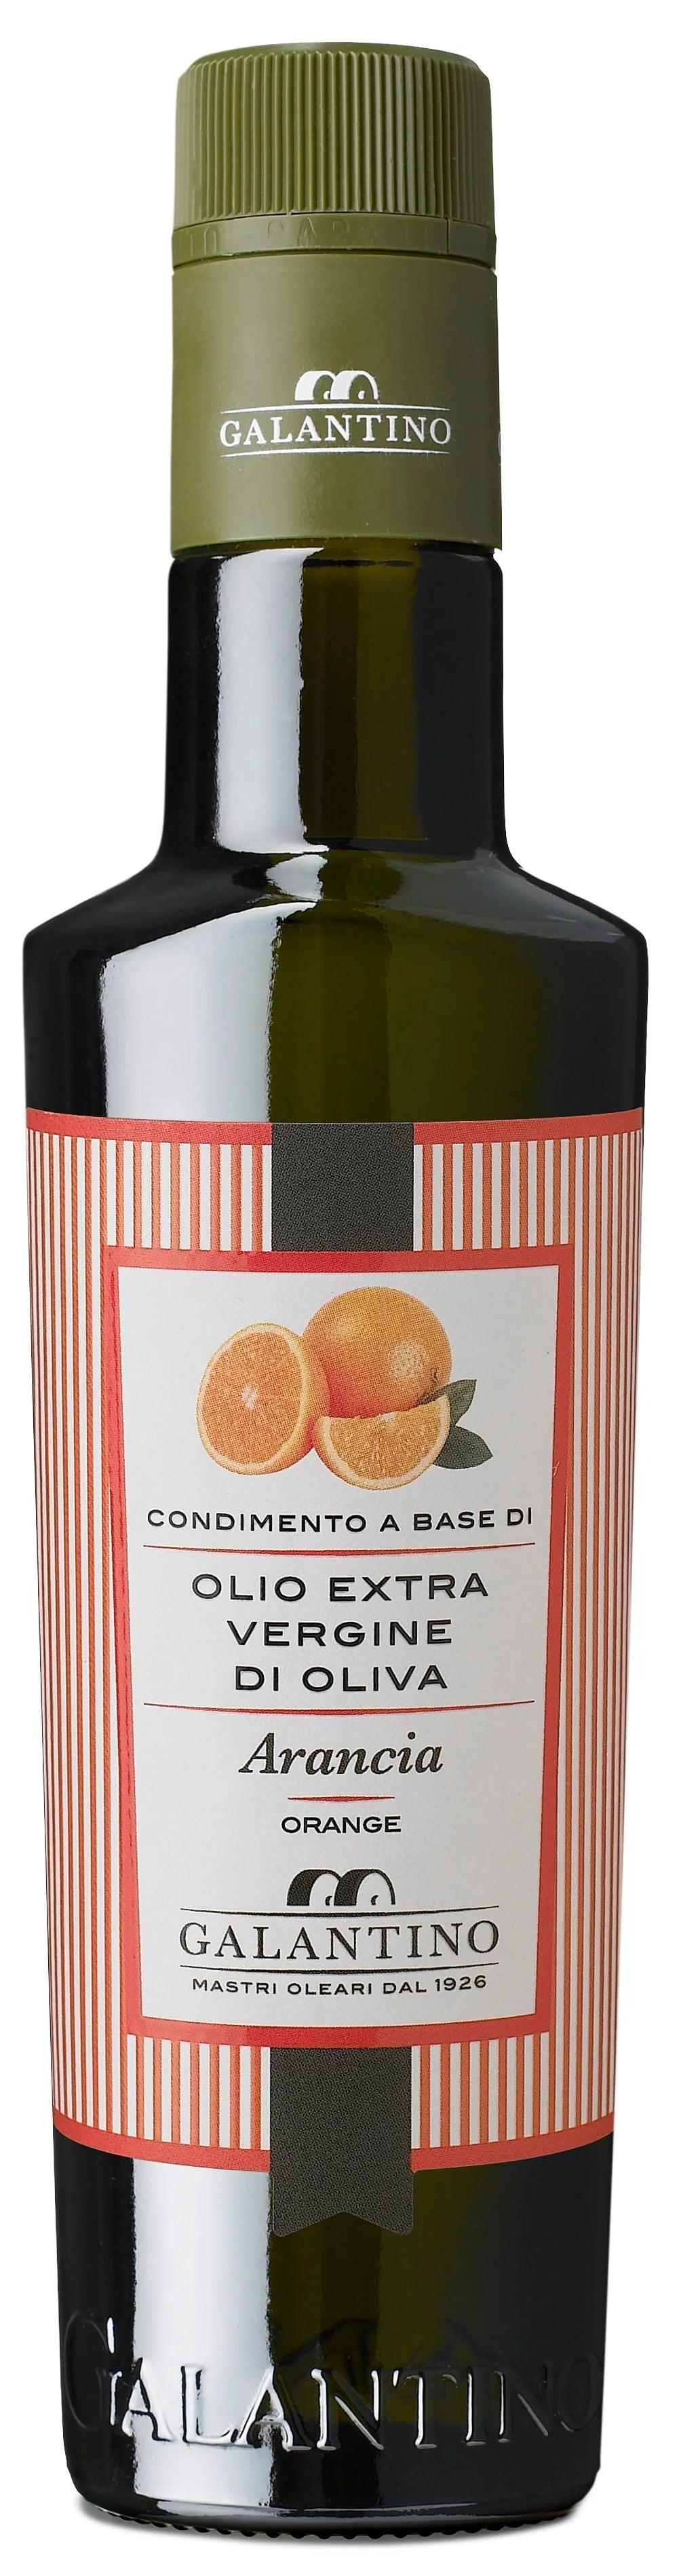 Extra virgin olive oil flavored with orange 250 ml